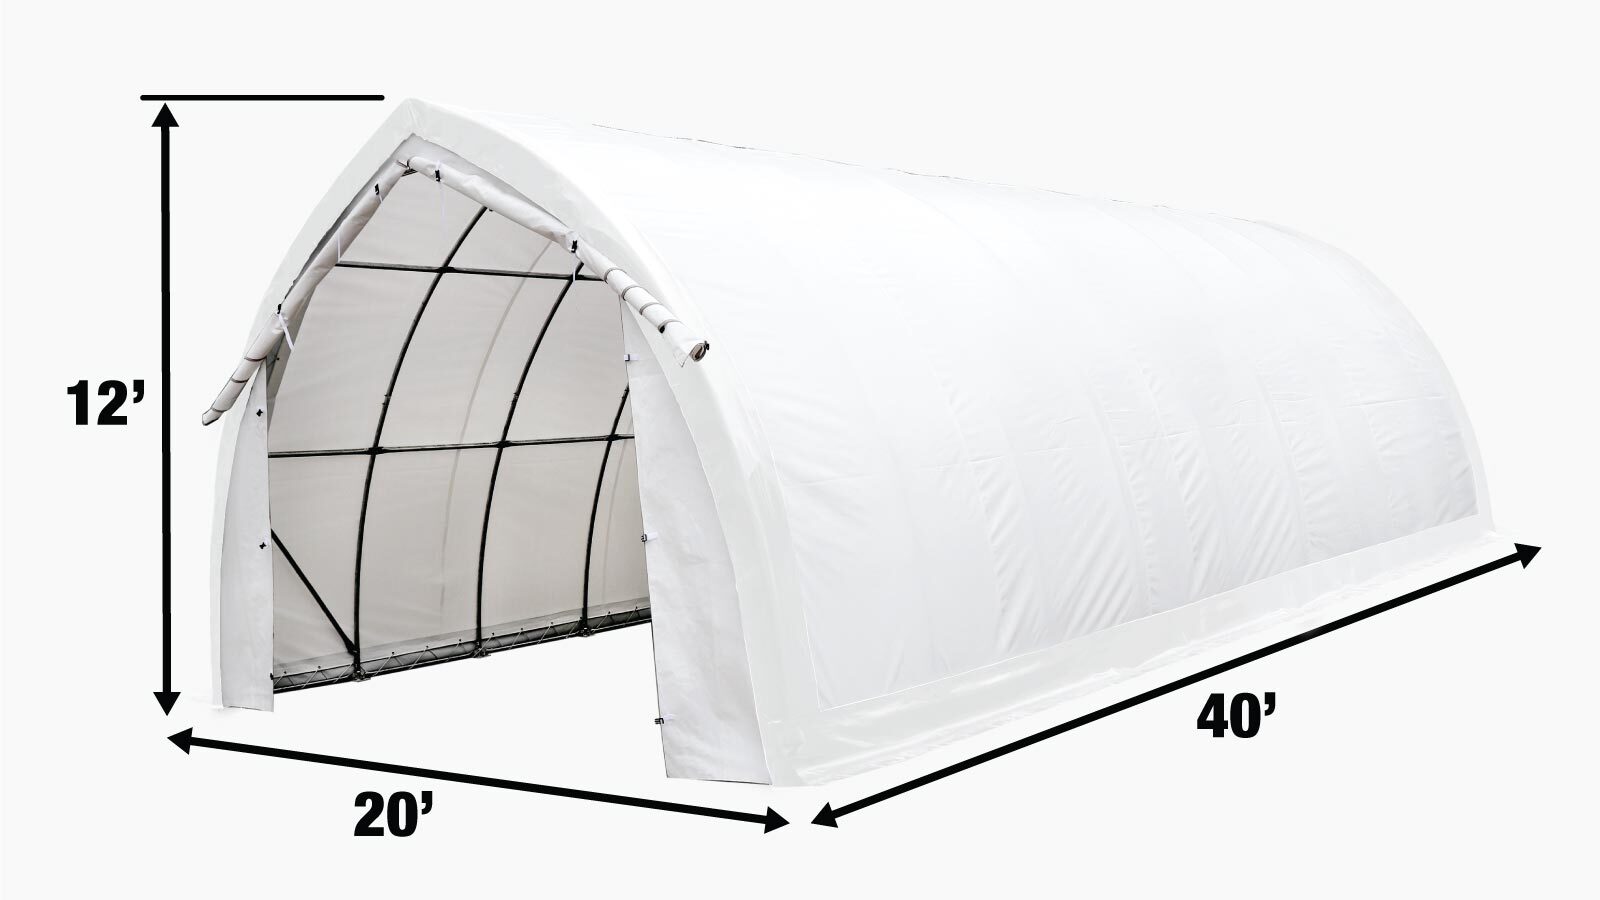 TMG Industrial 20' x 40' Arch Wall Peak Ceiling Storage Shelter with Heavy Duty 17 oz PVC Cover & Drive Through Doors, TMG-ST2041PV(Previously(ST2040PV)-specifications-image